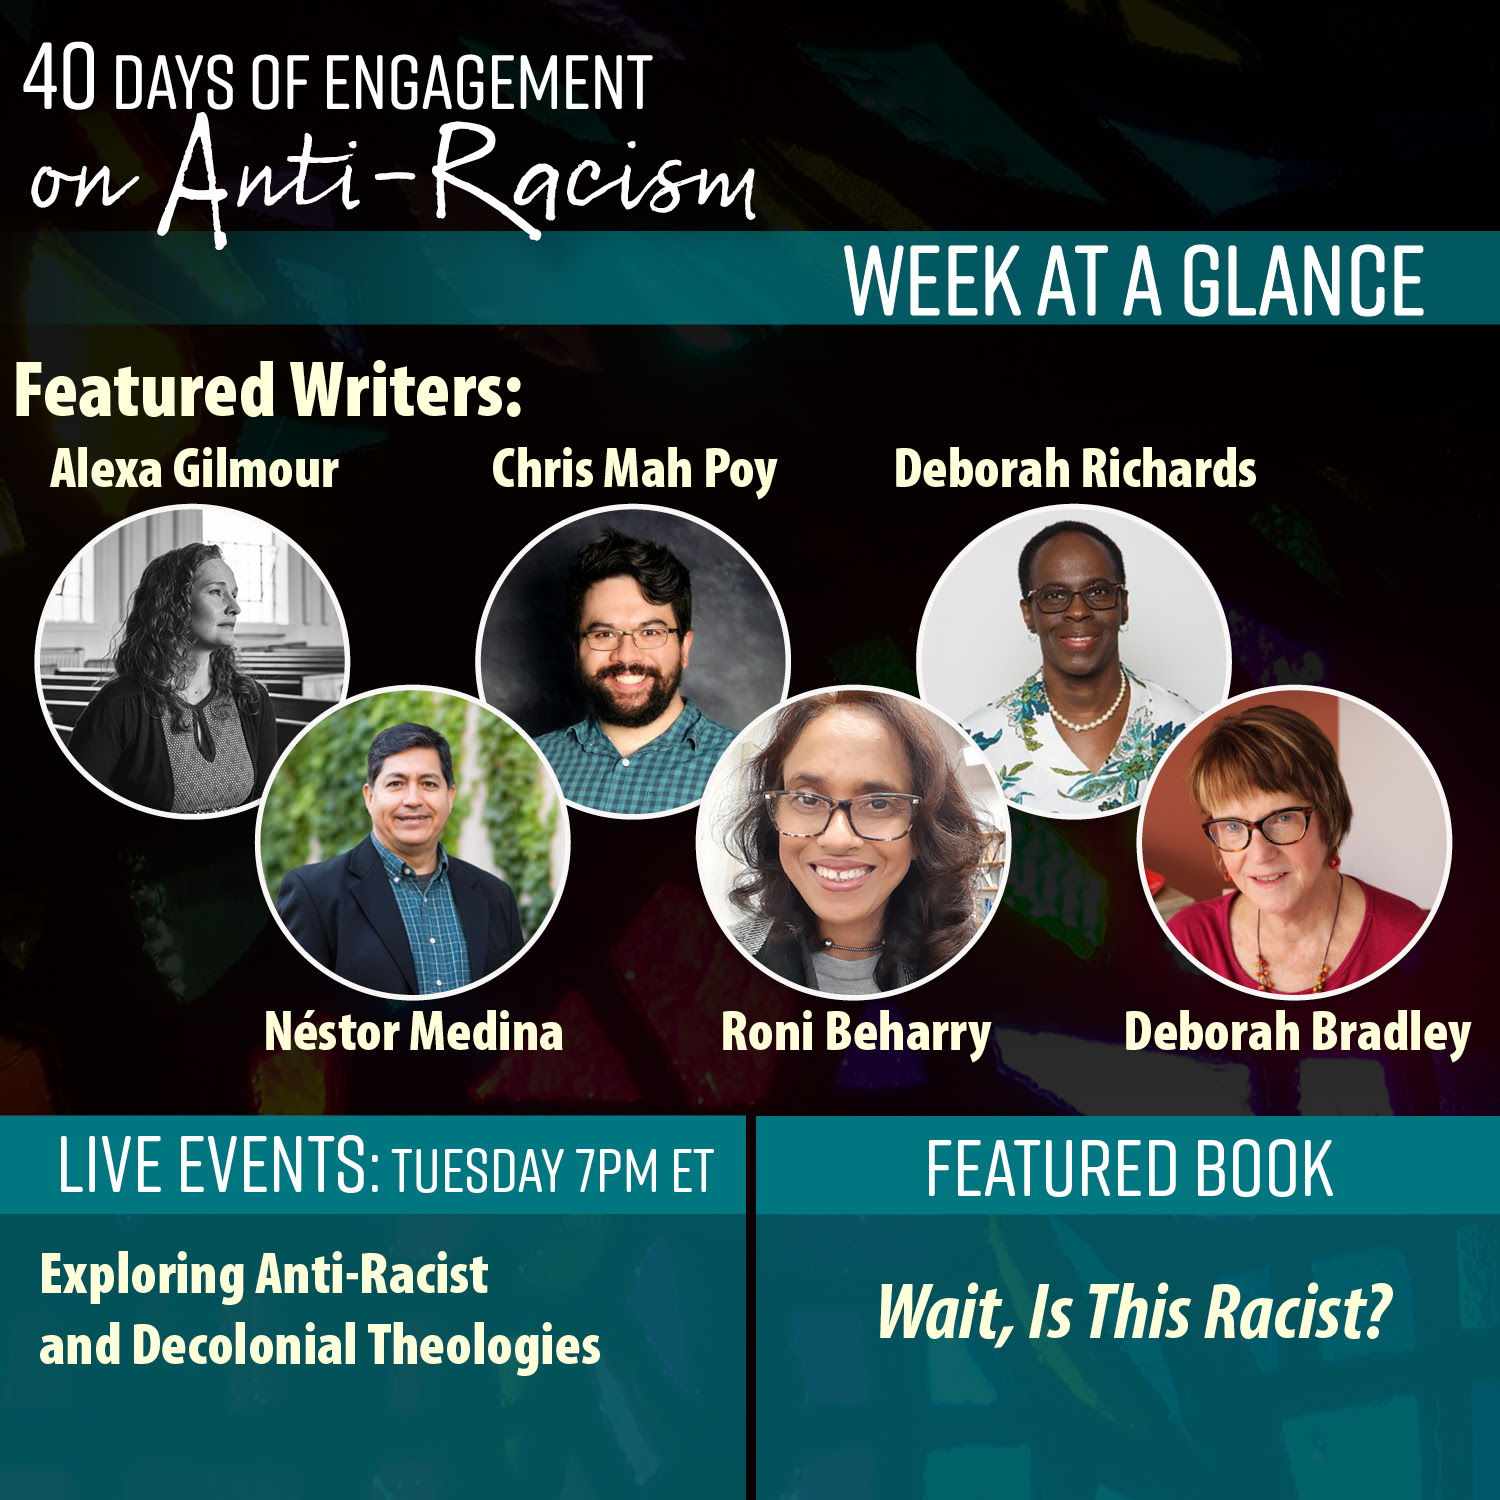 40 Days of Engagement on Anti-Racism week at a glance